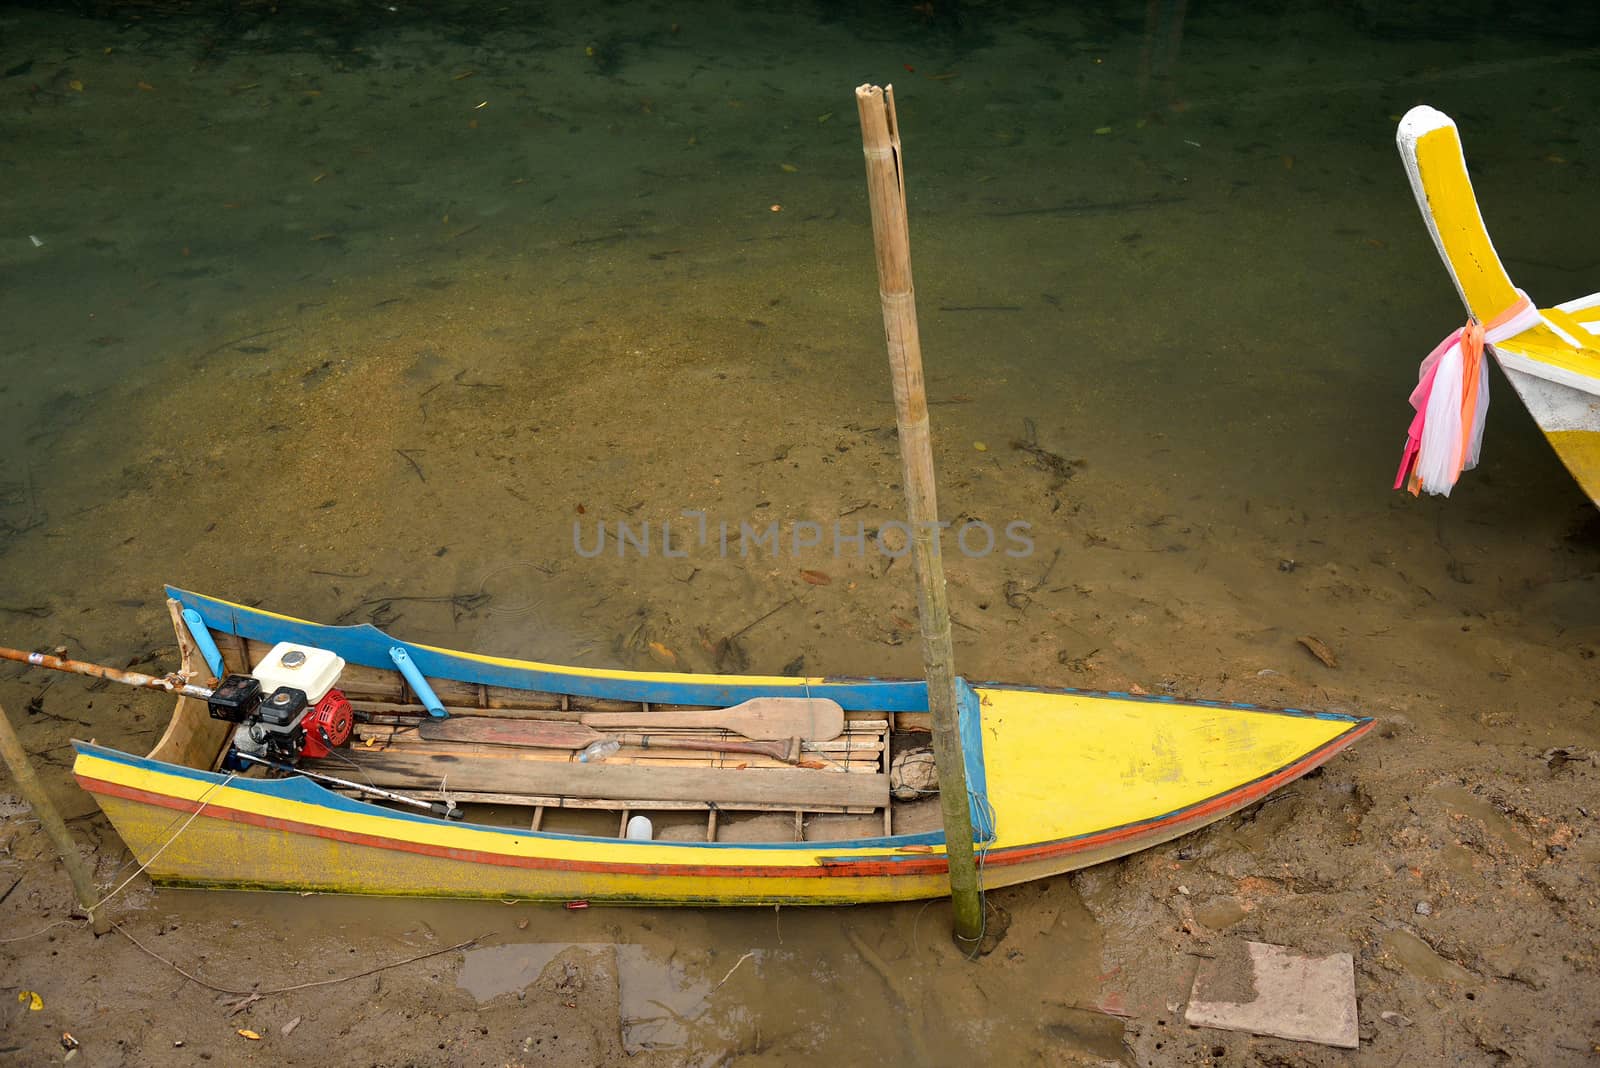 thetraditional boat in mangroves forest, Krabi, Thailand. by think4photop